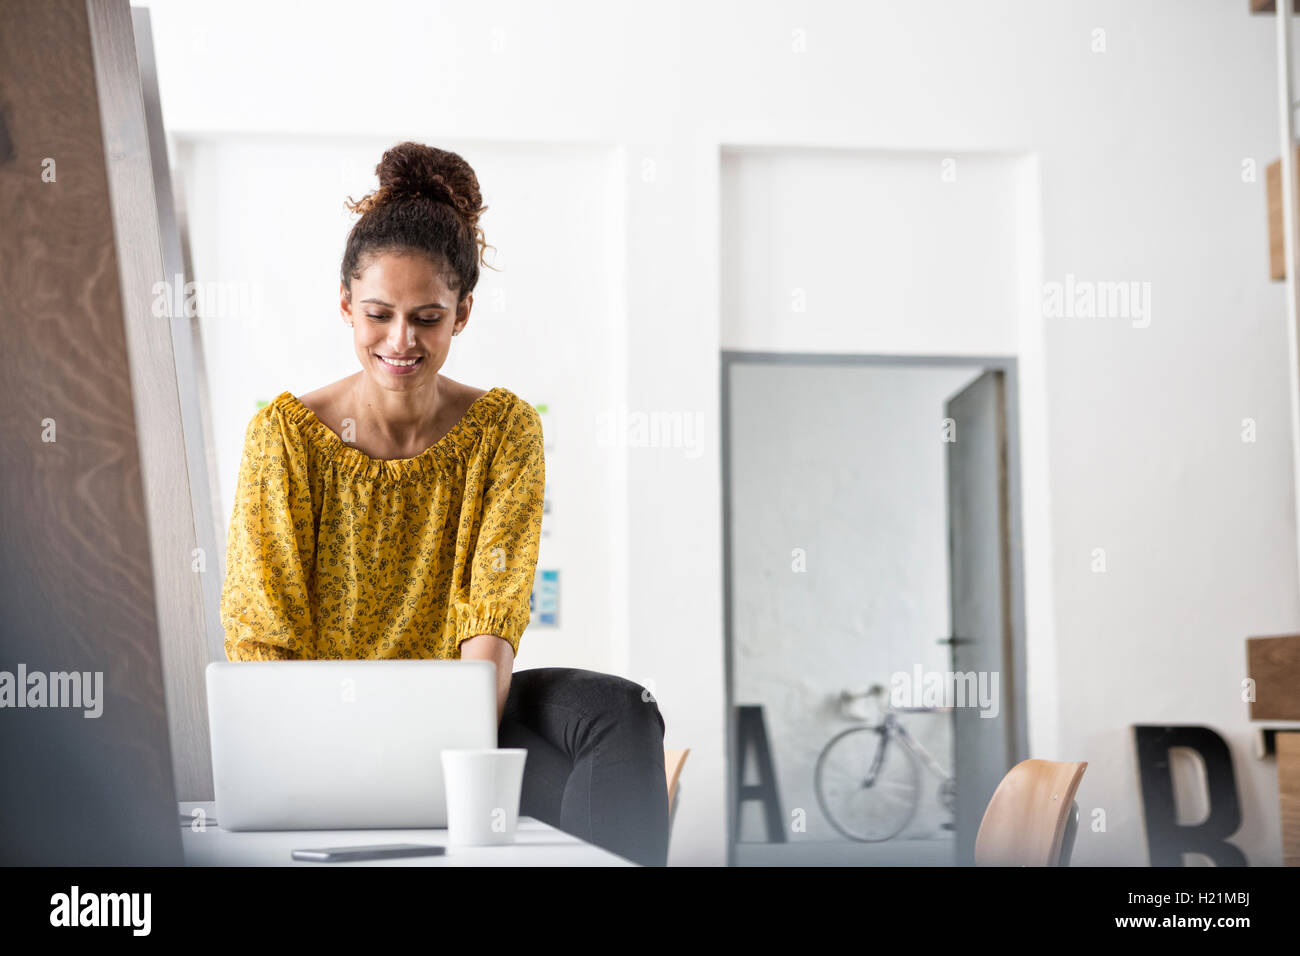 Smiling woman sitting on office desk using laptop Stock Photo